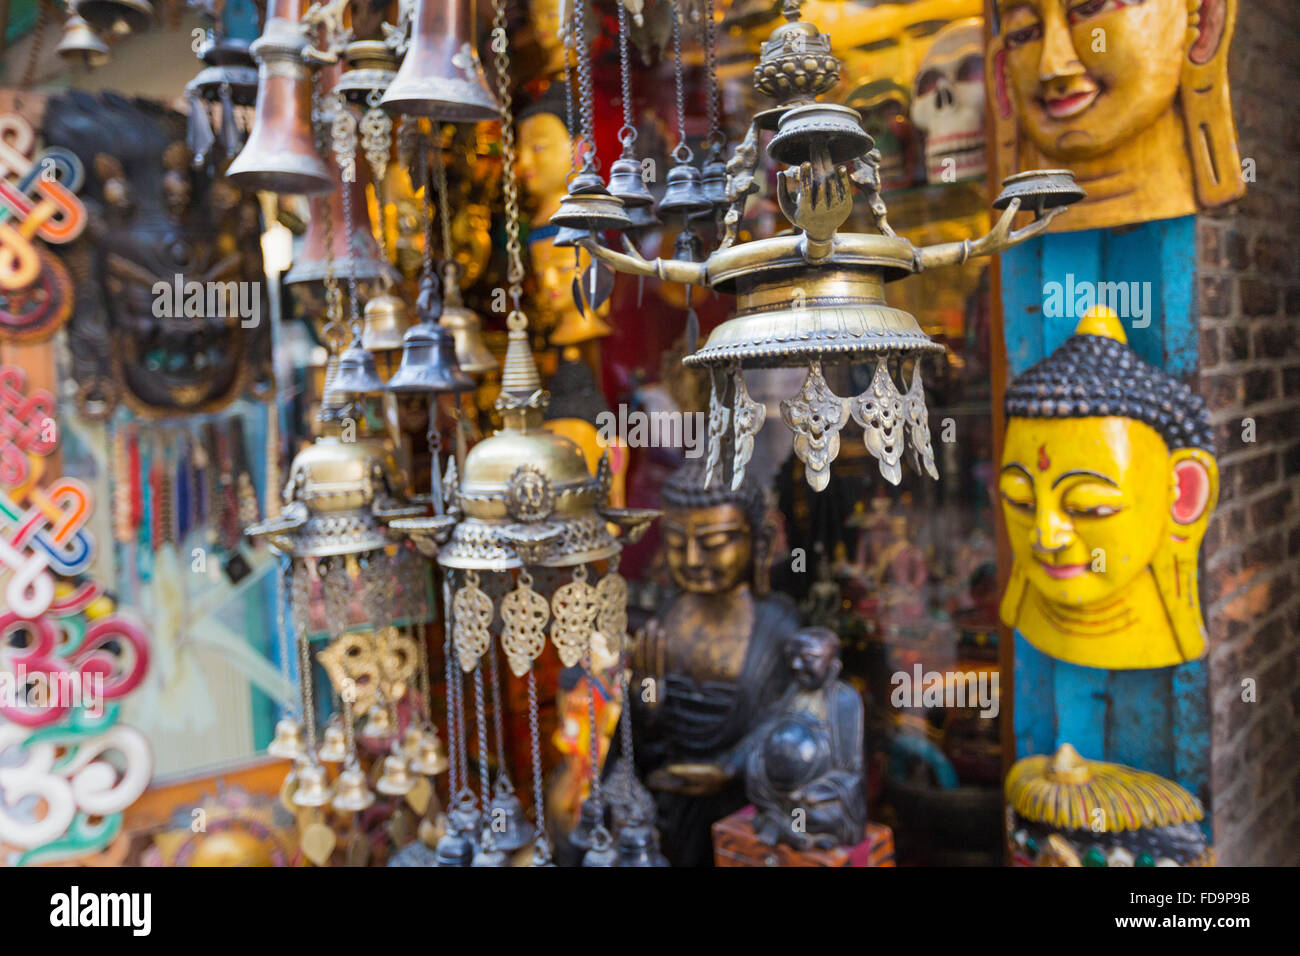 Masks, dolls and souvenirs in street shop at Durbar Square in Kathmandu, Nepal. Stock Photo